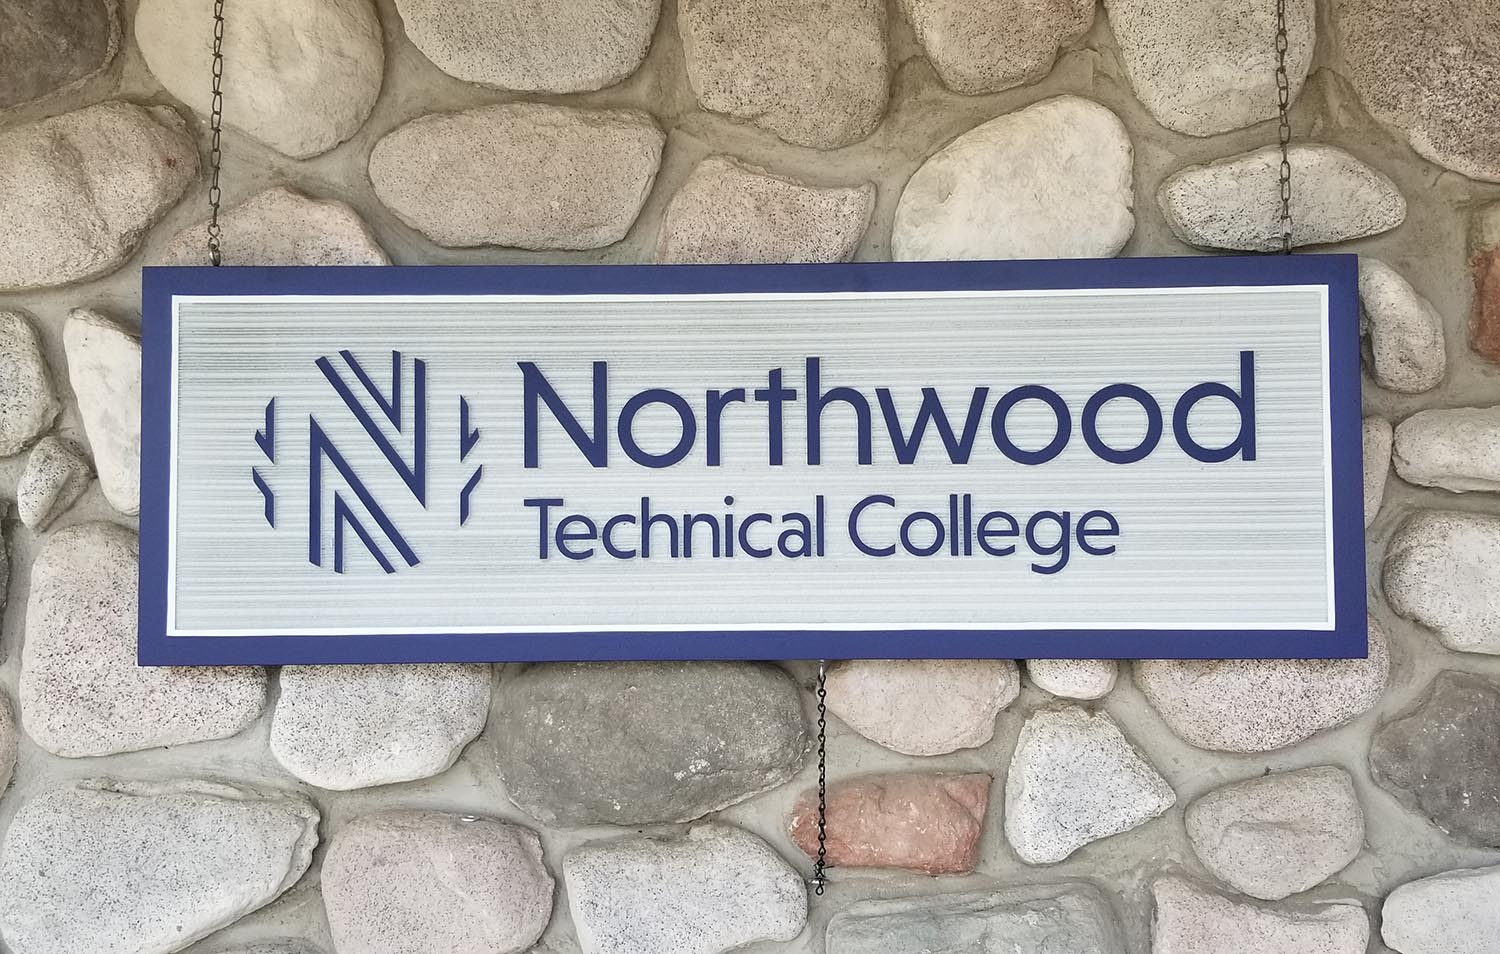 Signage that says Northwood Technical College